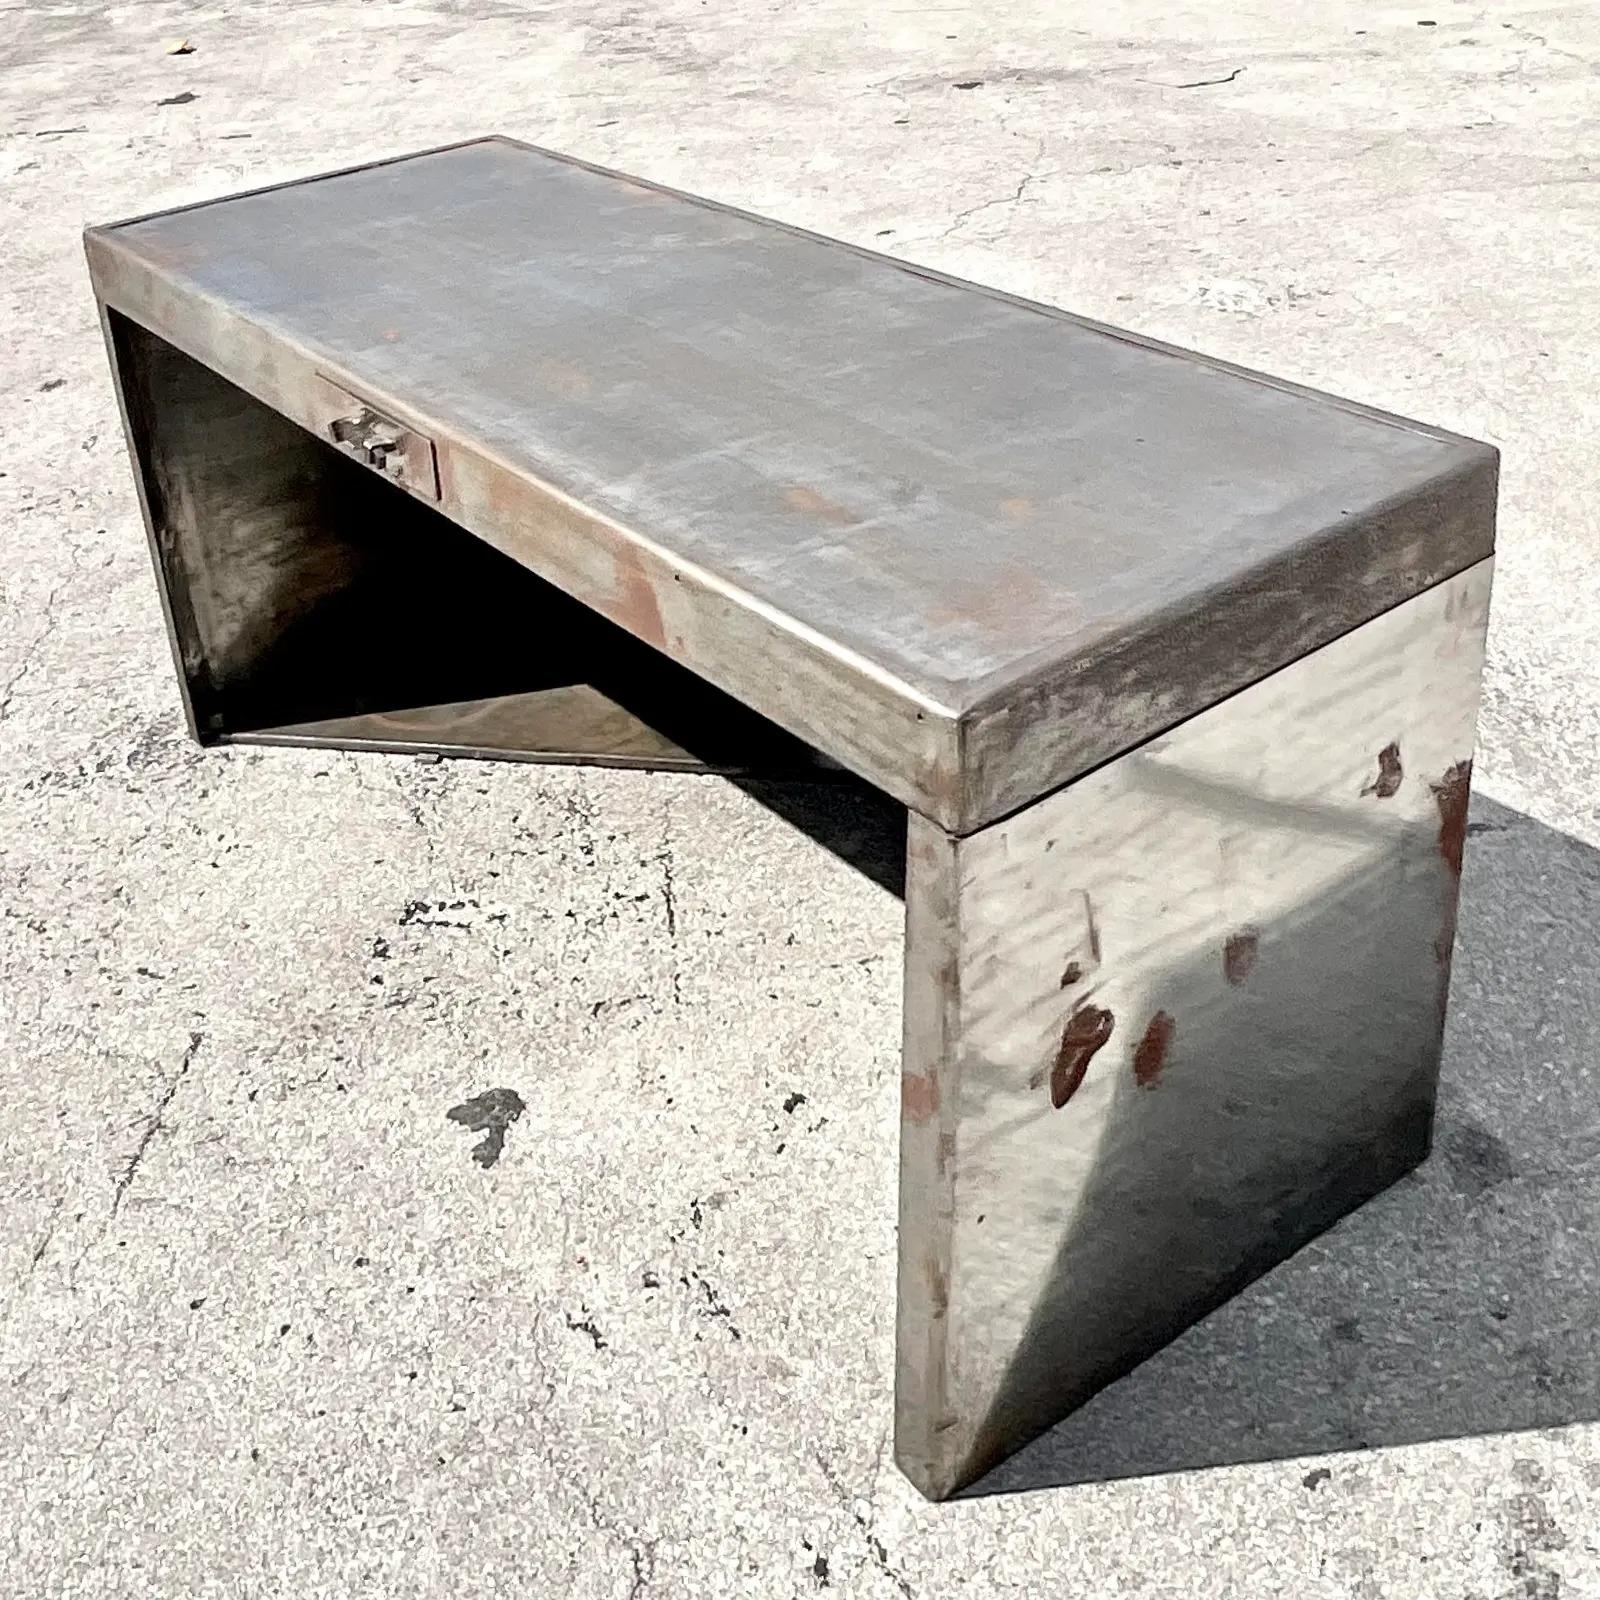 An incredible vintage Art Deco desk. A great example of The Machine Age. Simple and stream line in its design. All over gnarly patina from time. Acquired from a Miami estate.